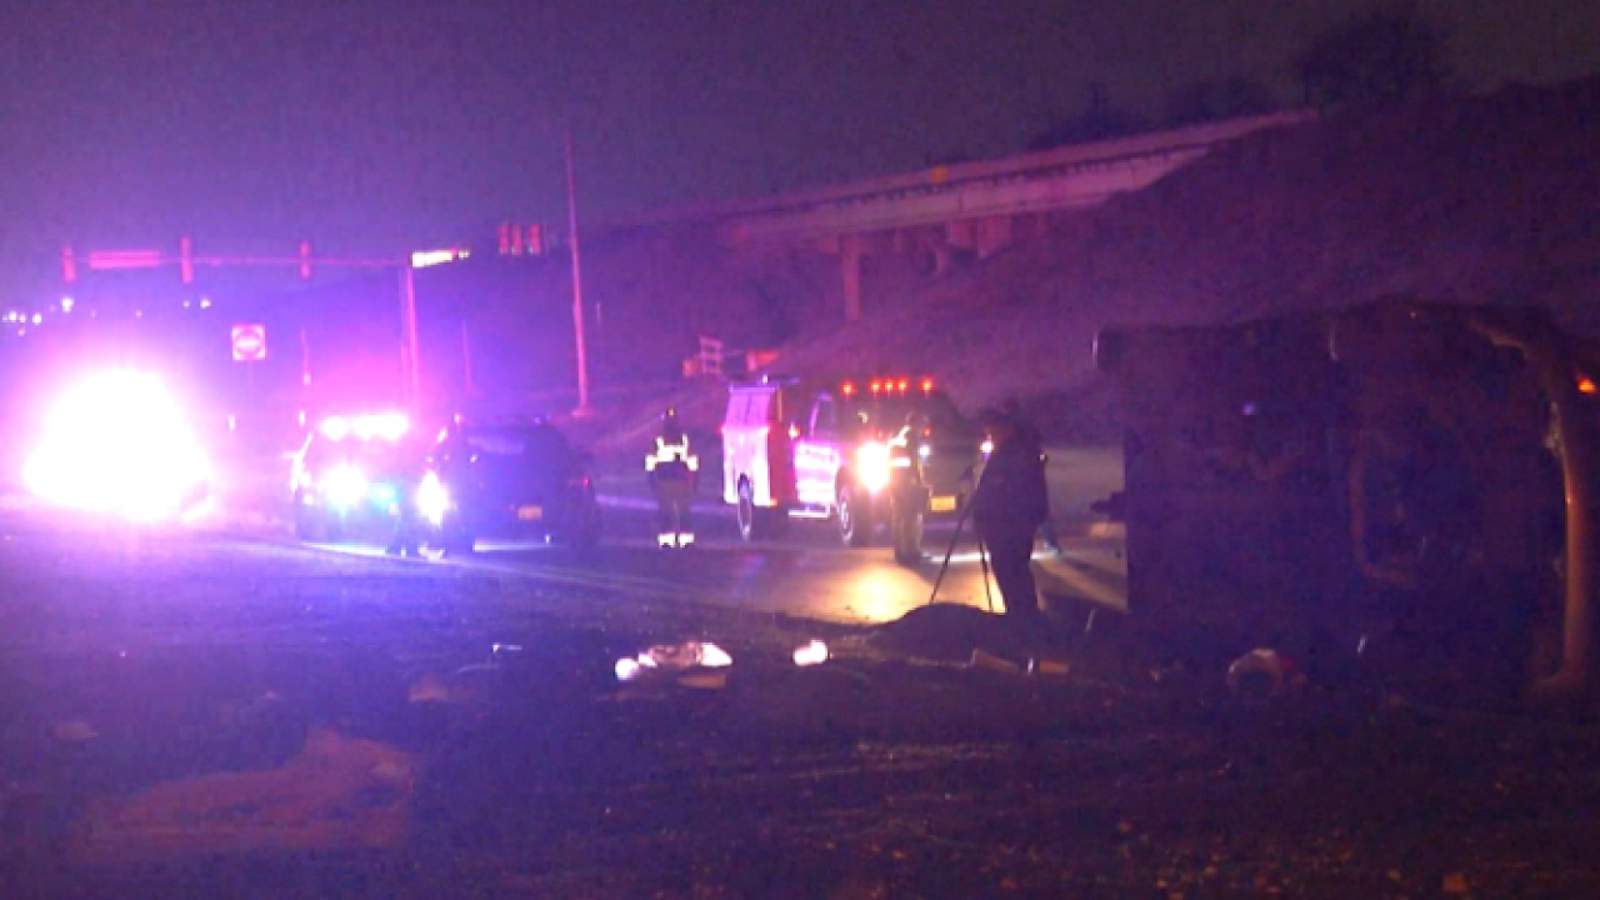 Driver of truck ejected, killed in crash after failing to navigate turn, police say